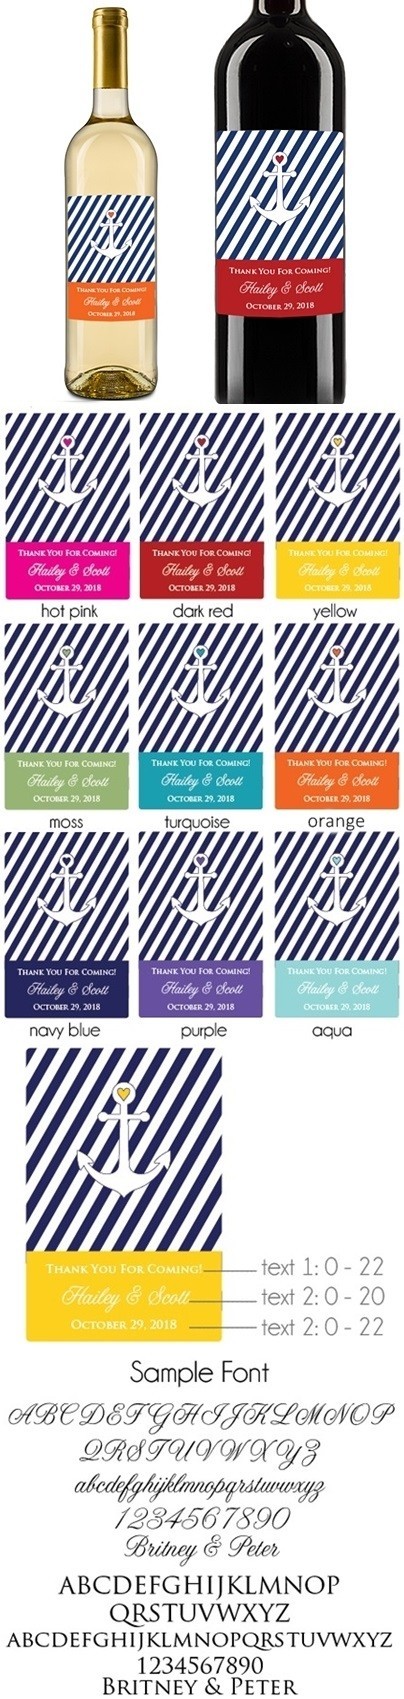 Personalized Anchor Motif Wine Bottle Stickers (9 Colors) (Set of 5)